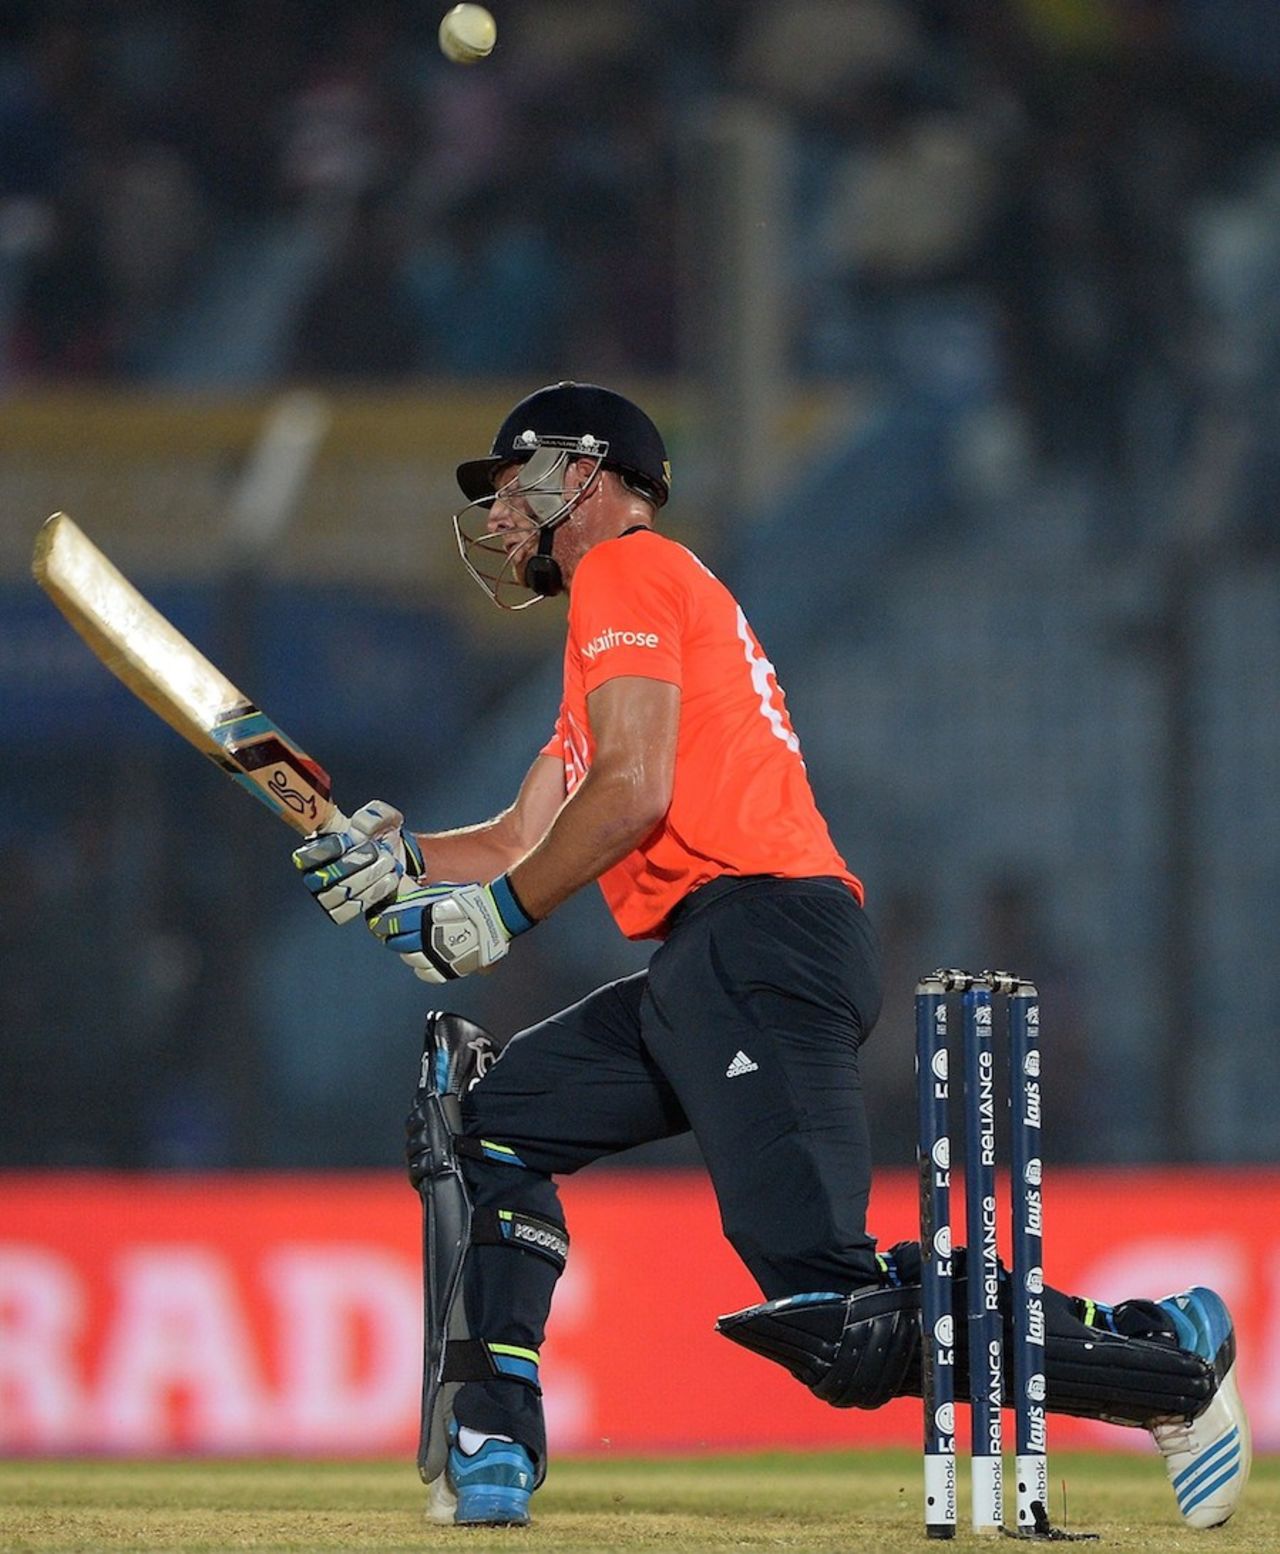 Jos Buttler scoops one over his shoulder, England v New Zealand, World T20, Group 1, Chittagong, March 22, 2014